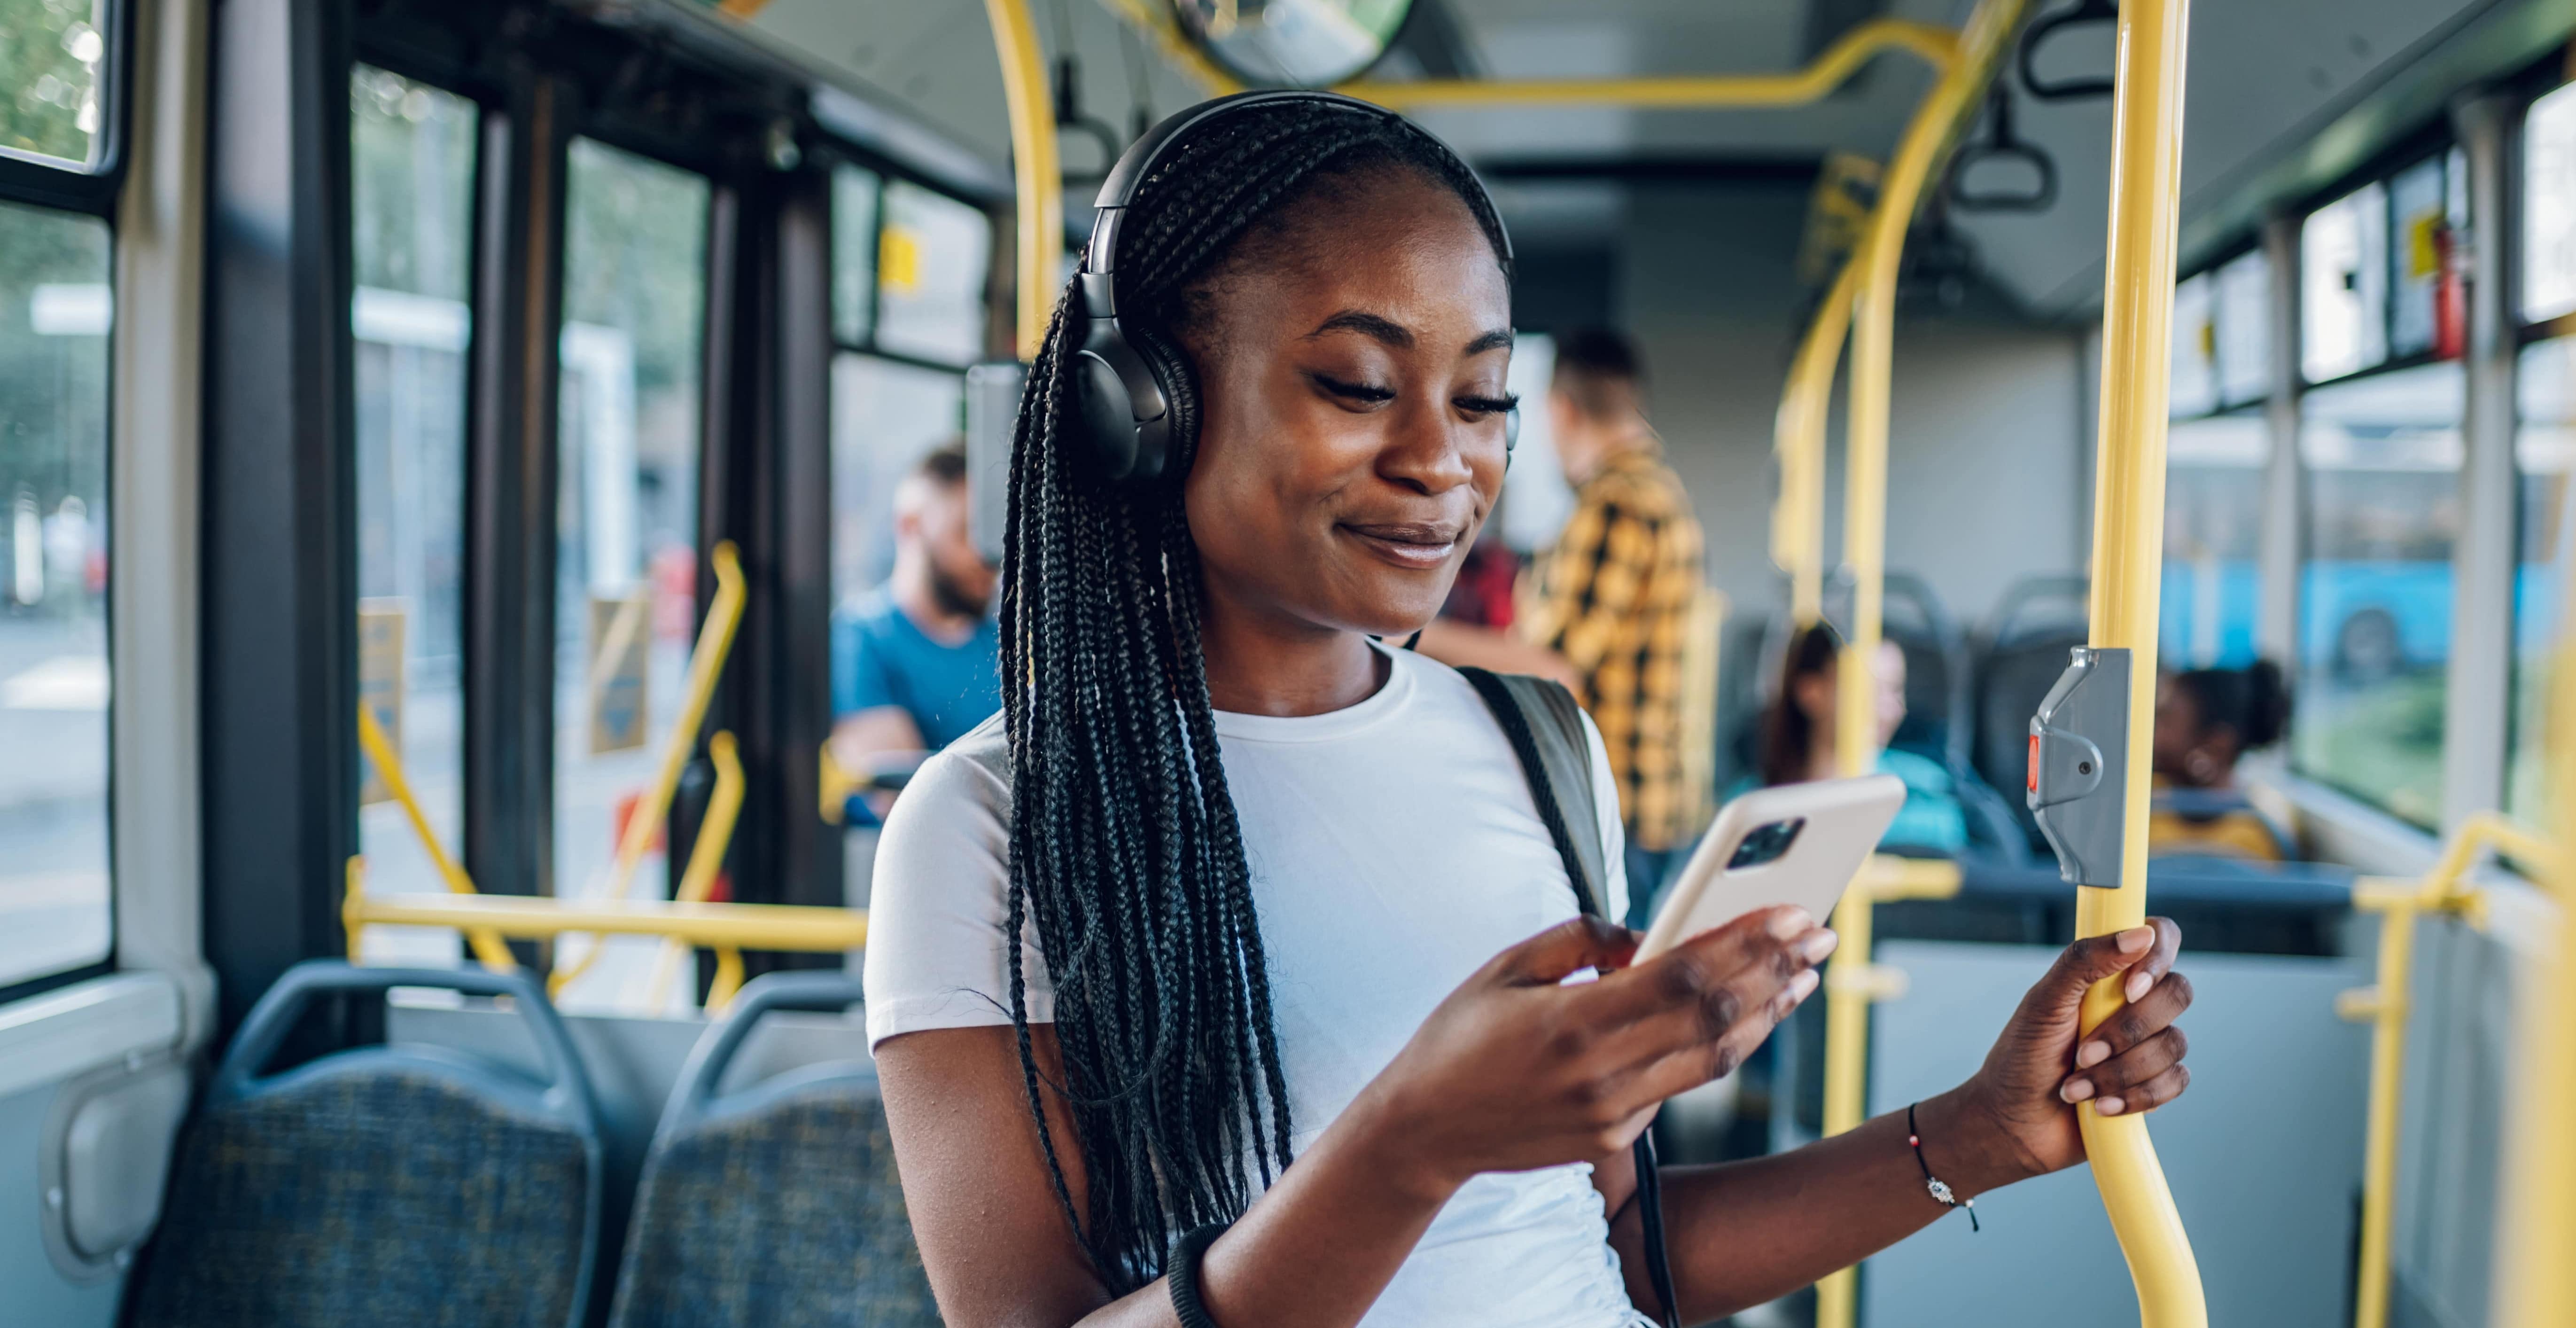 A dark-skinned young woman with long, black braids and over-the-ear headphones looks at her smartphone.